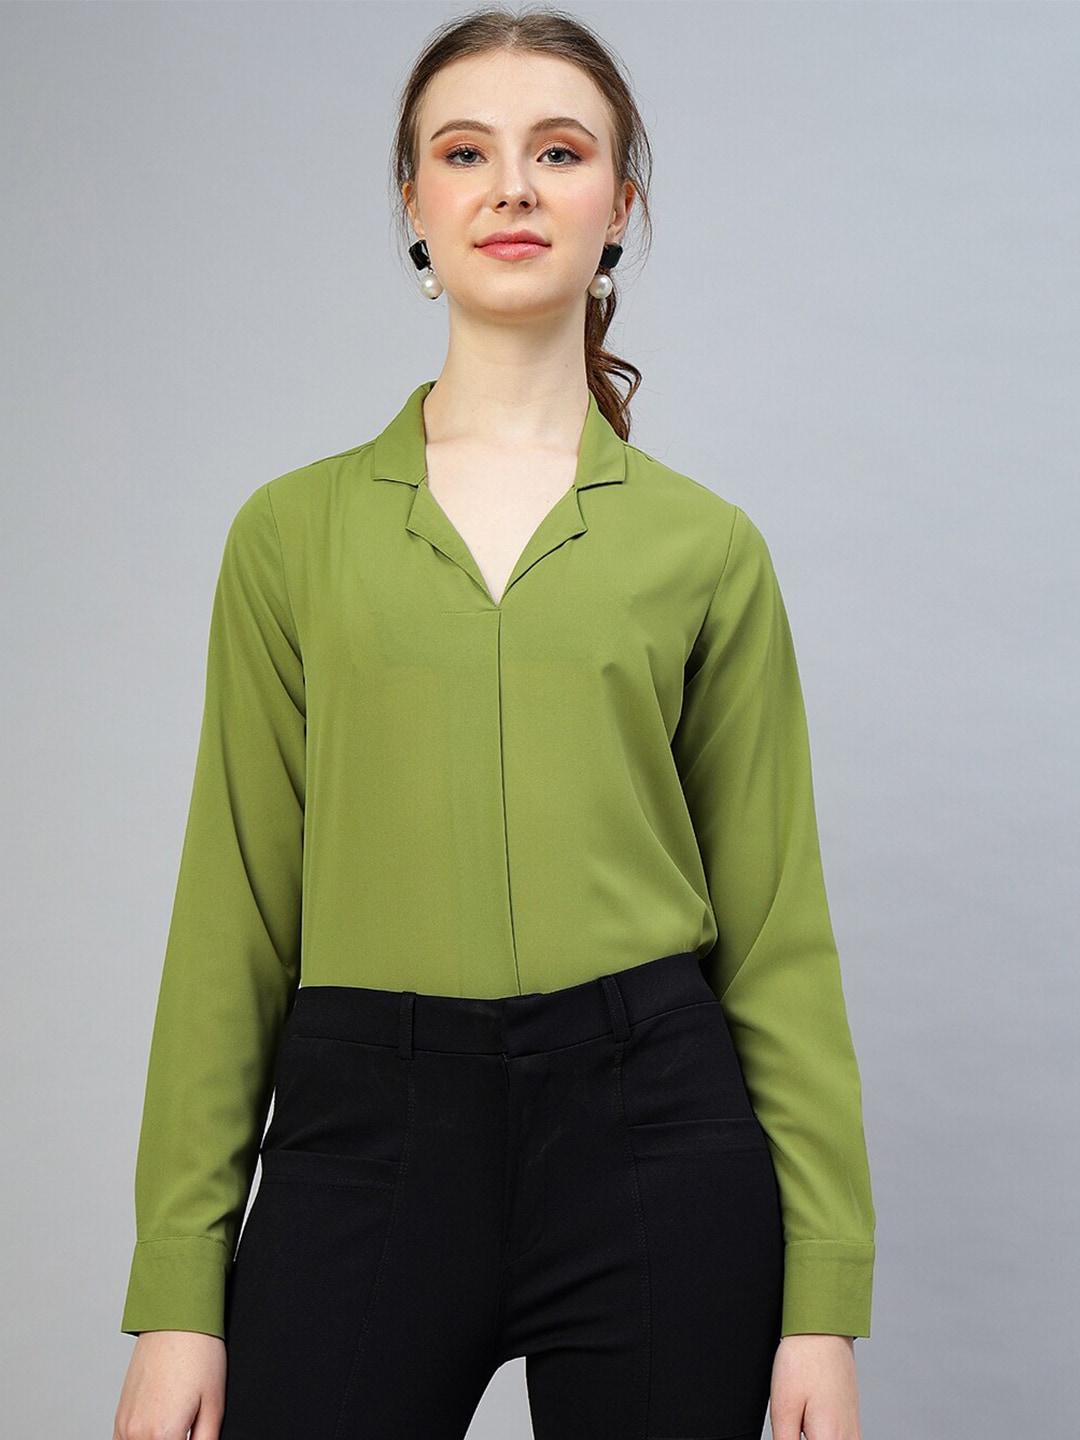 FITHUB Green Roll-Up Sleeves Shirt Style Top